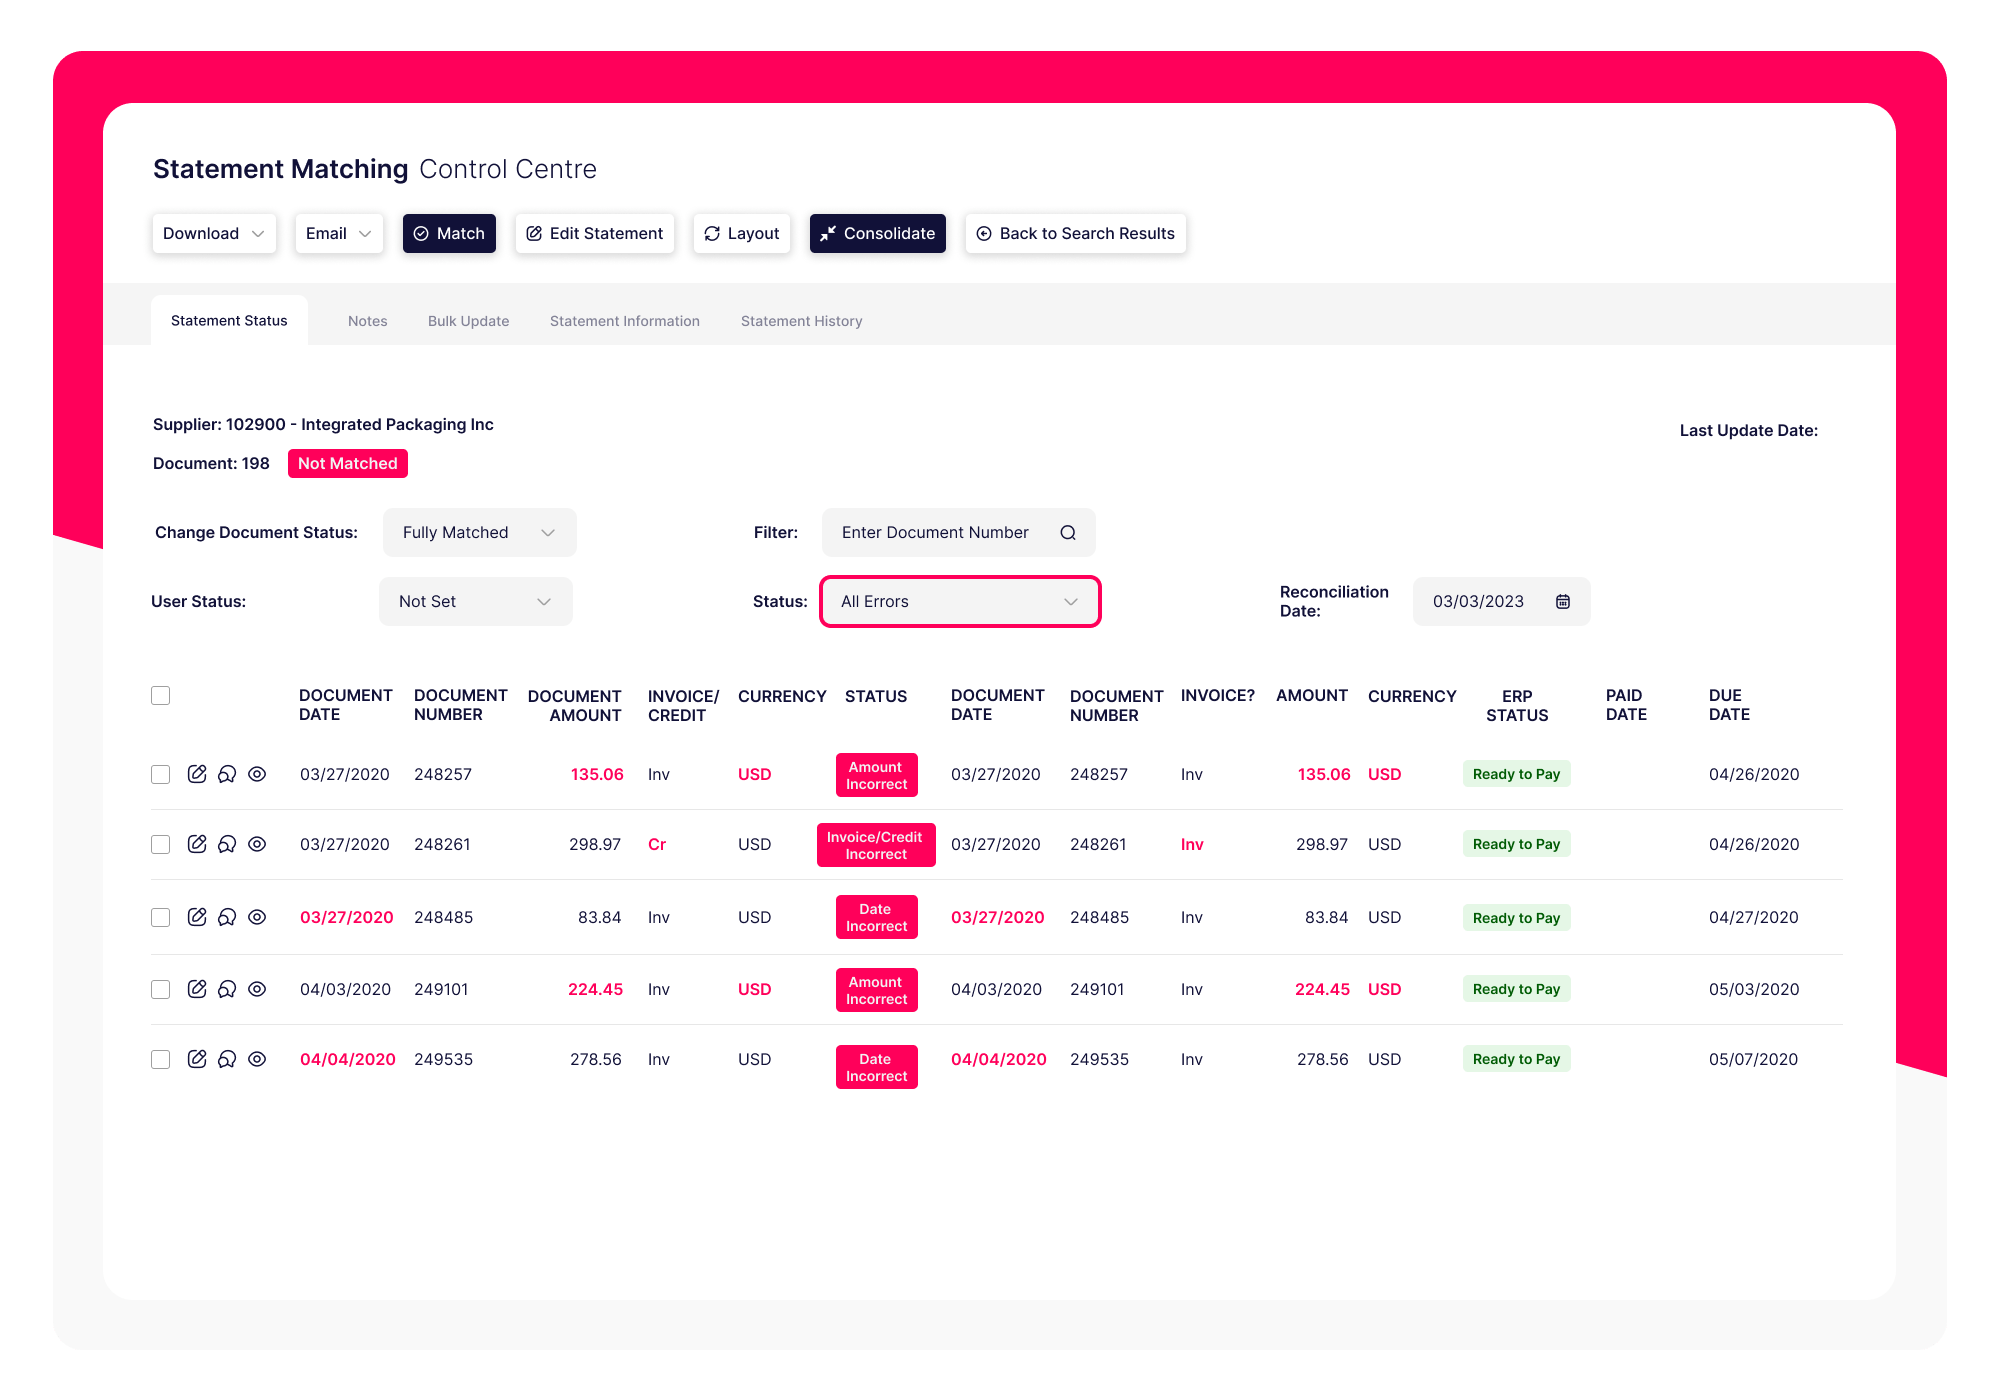 Statement Matching - Fully Matched with Data Mismatches